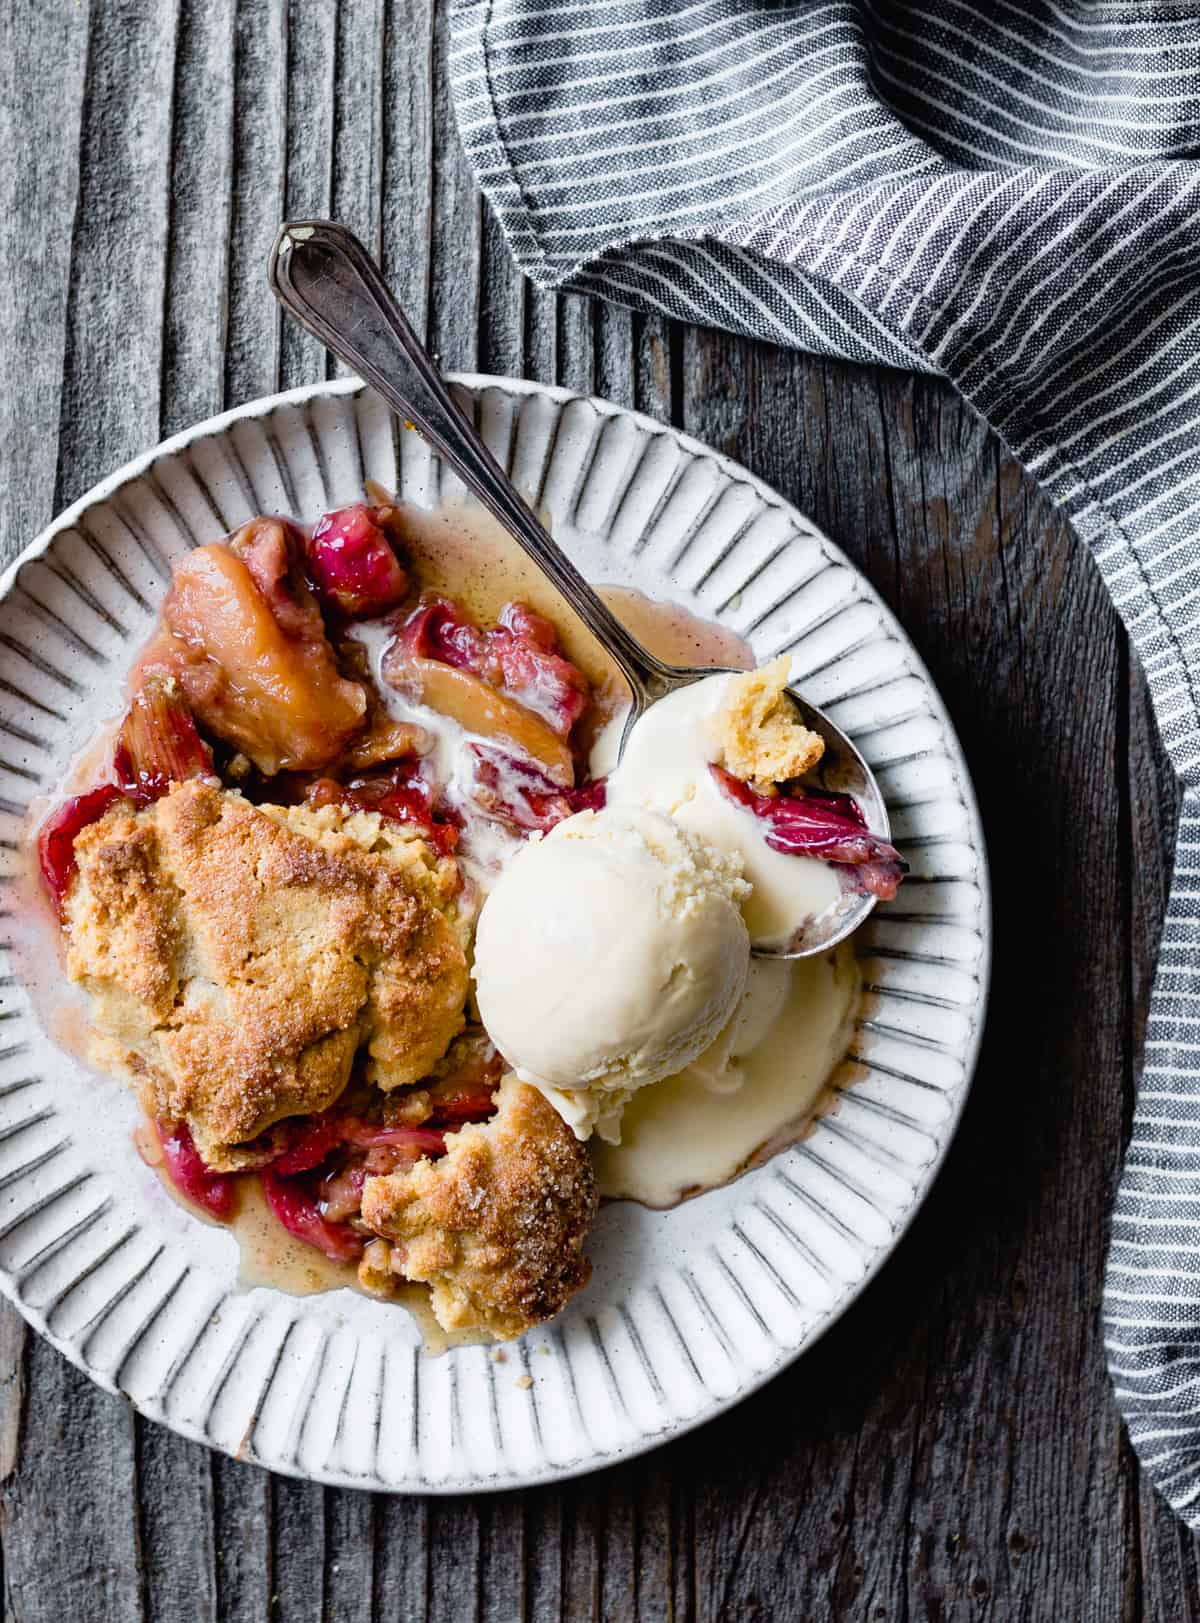 Gluten Free Apple Cobbler with Maple & Rhubarb with ice cream 